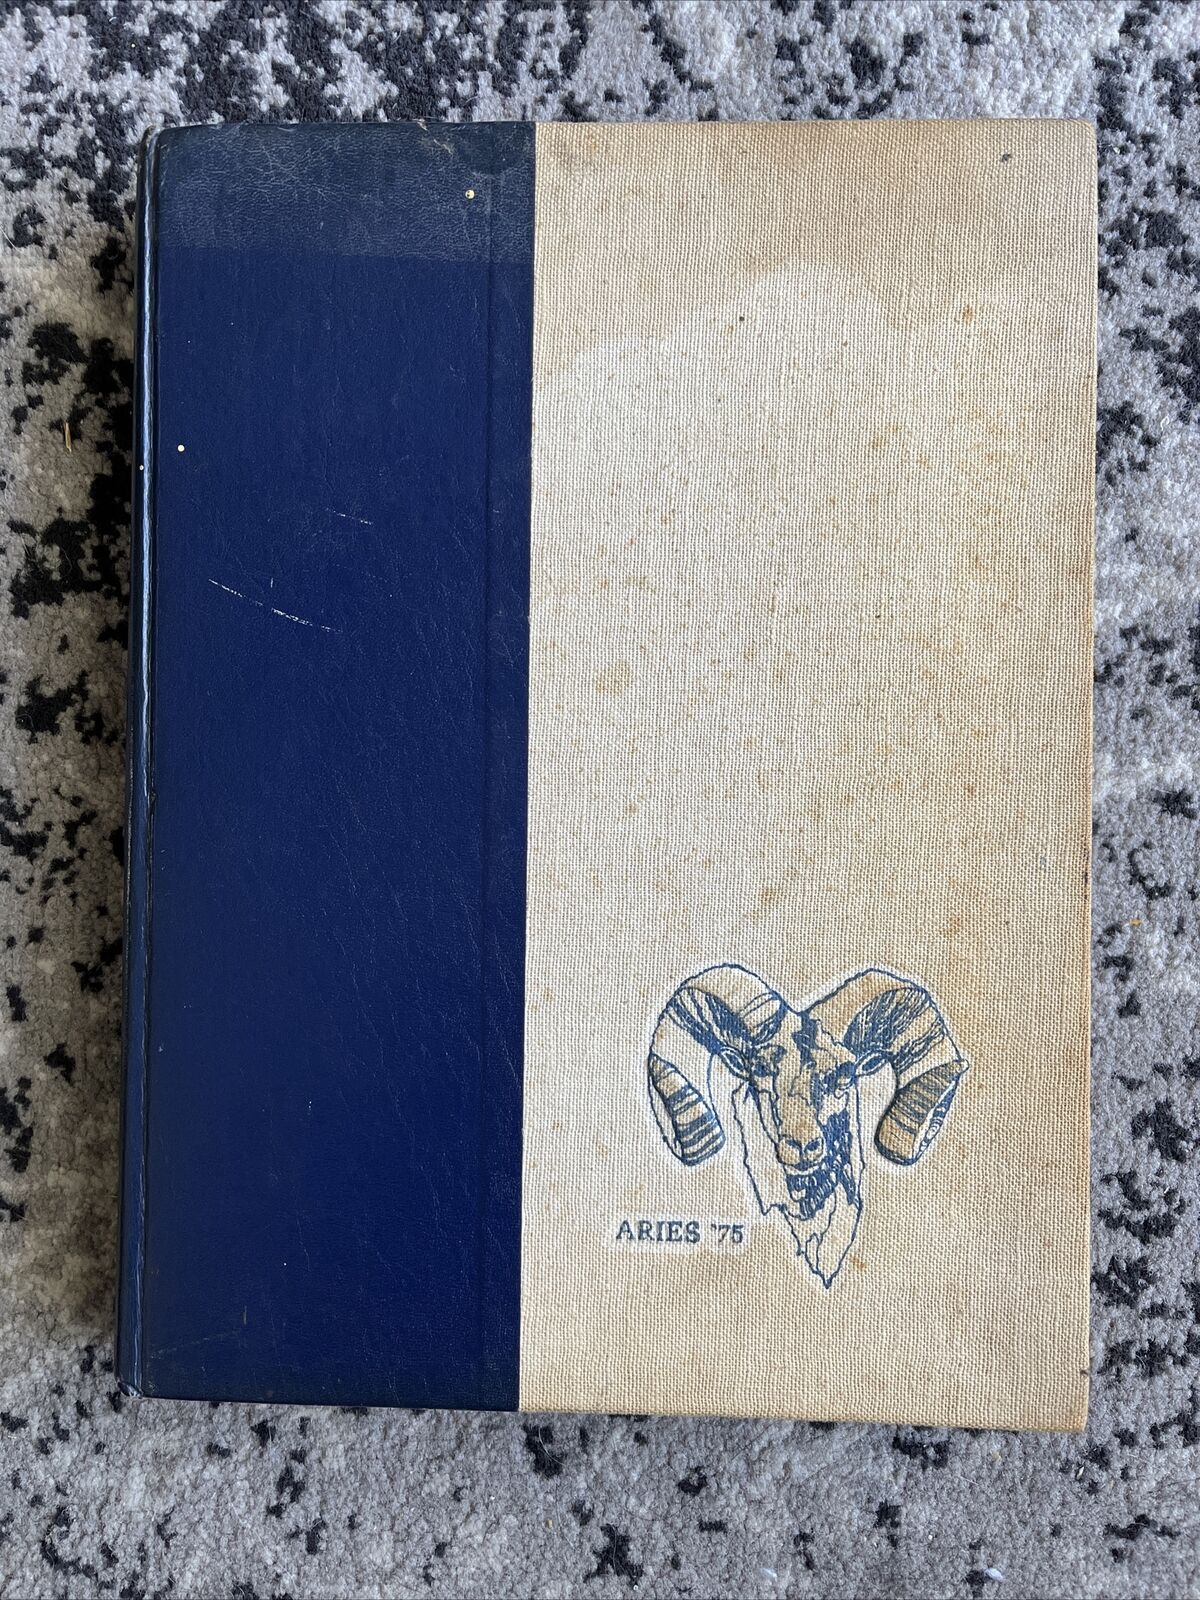 Randolph Township New Jersey High School Aries 1975 Yearbook Annual